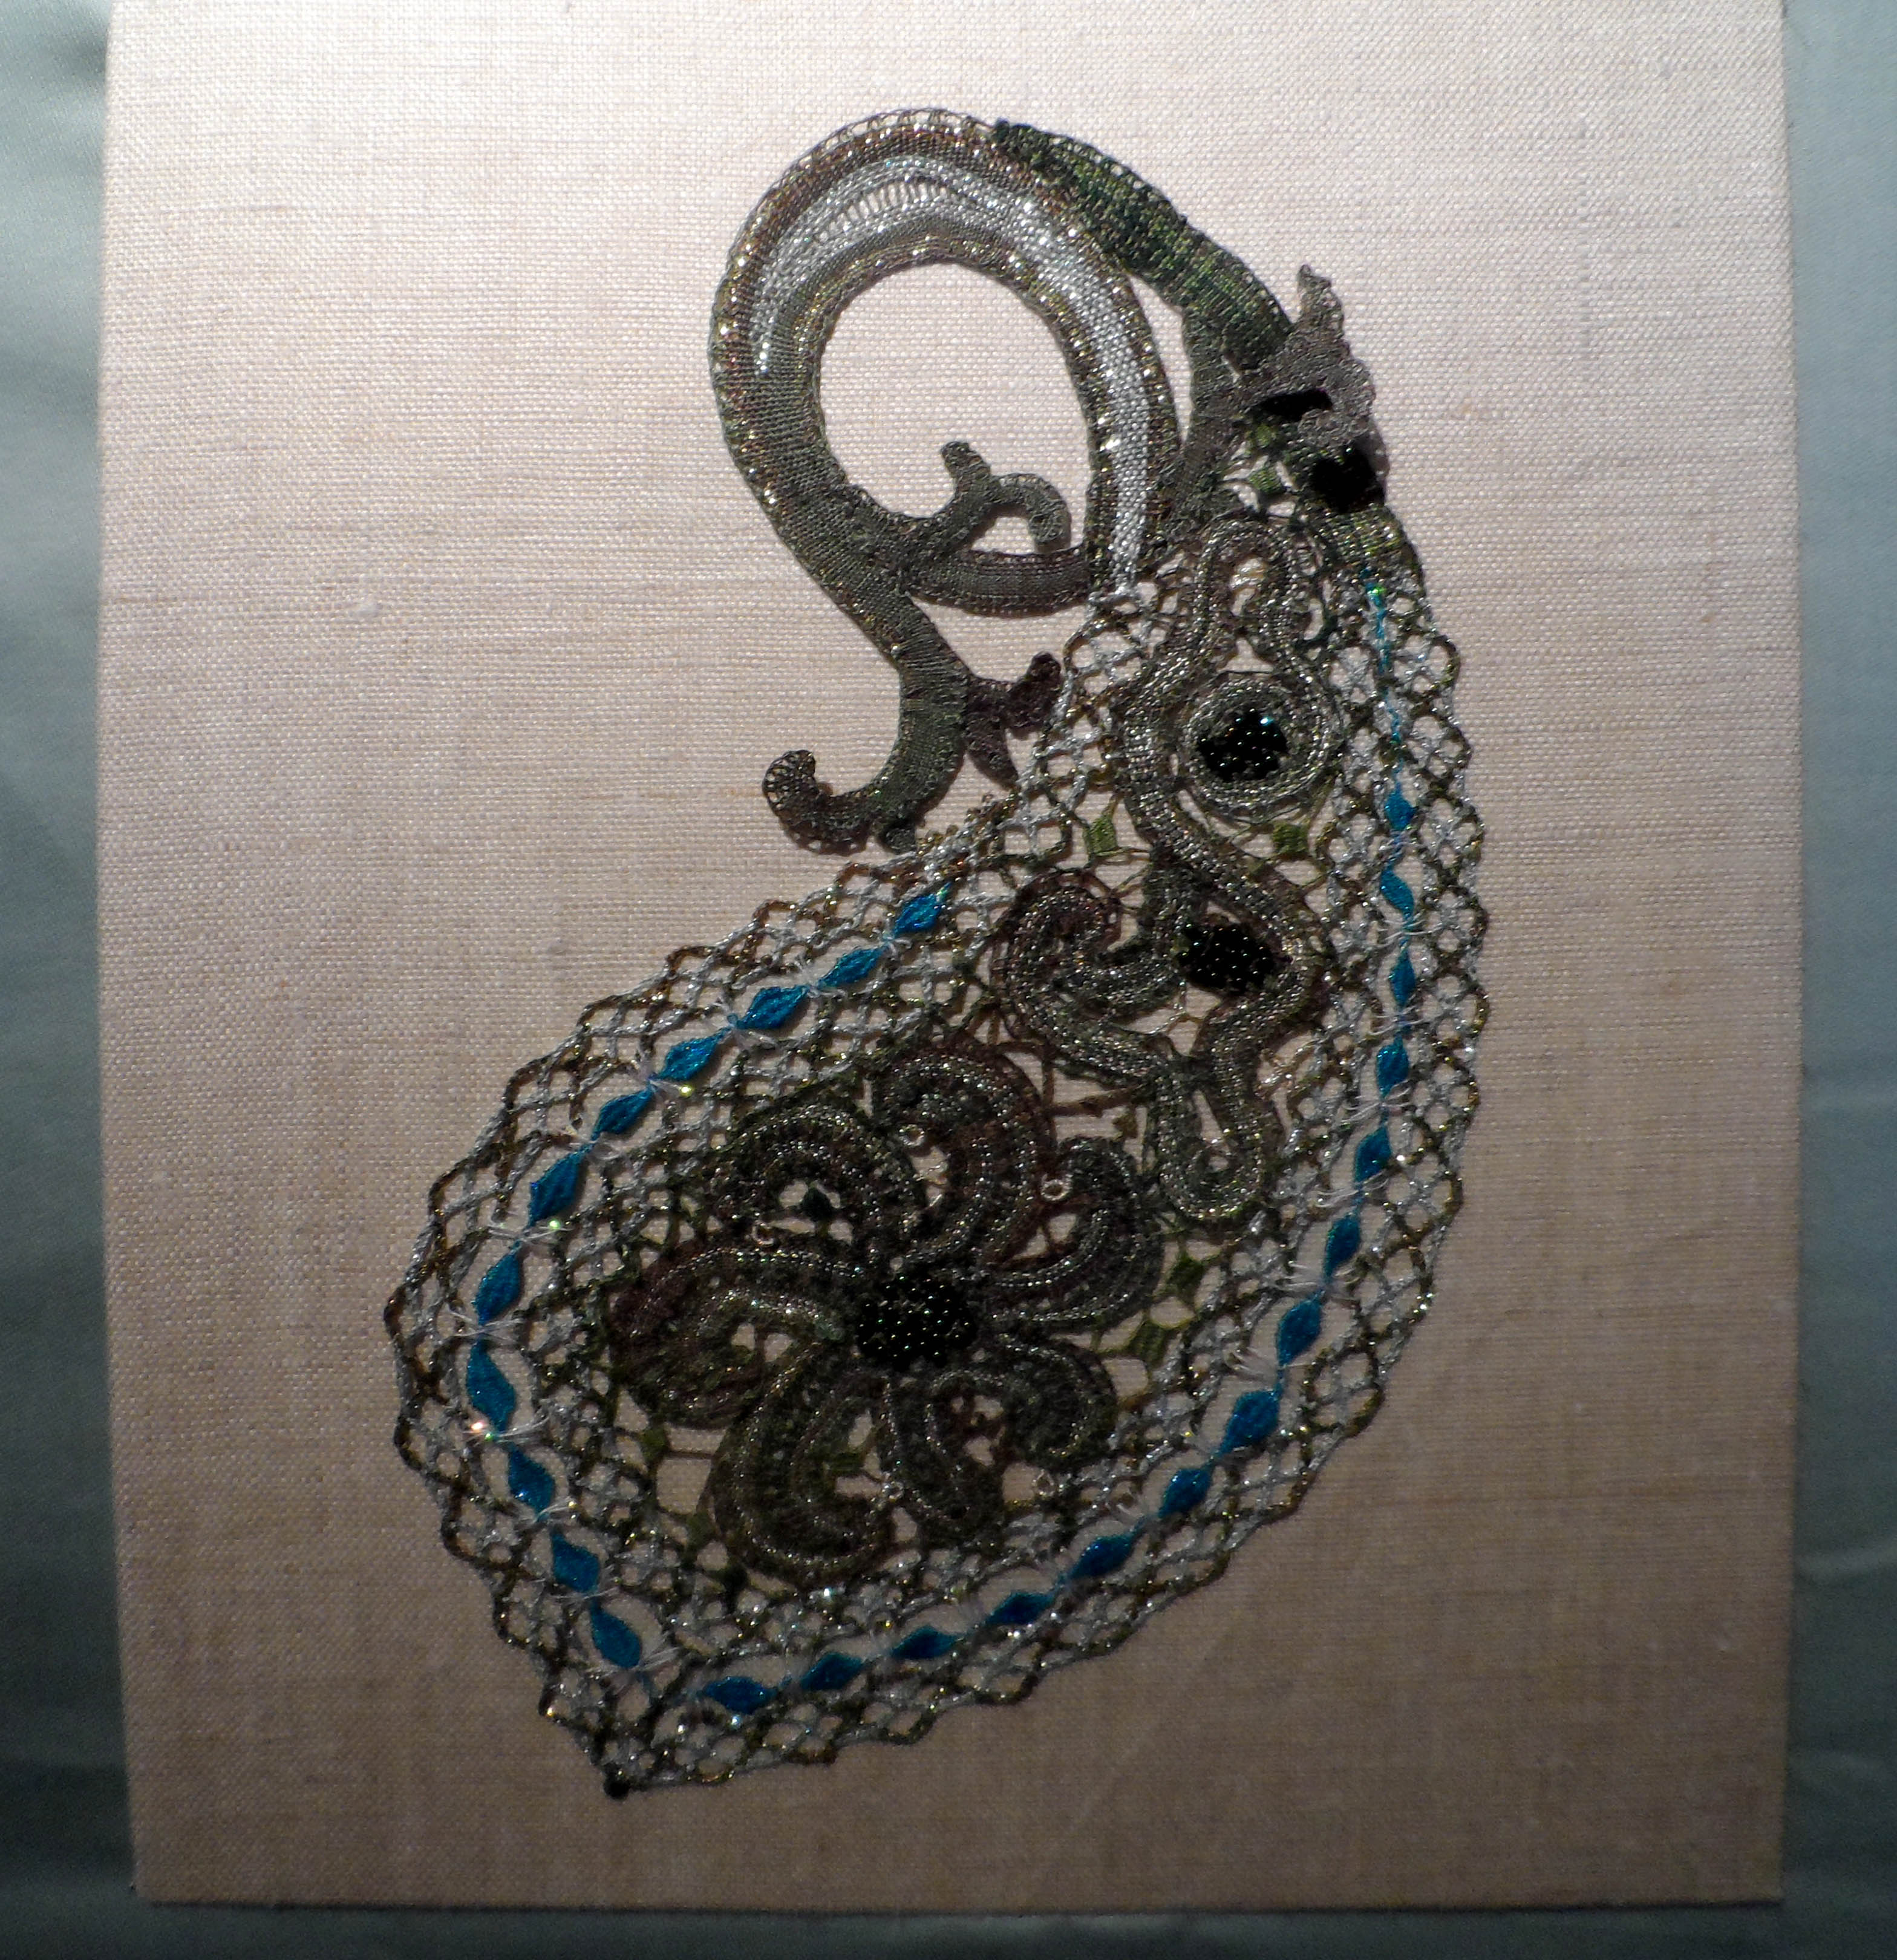 SEEING DRAGONFLIES, Babette Reidy, Cleveland Lace Guild